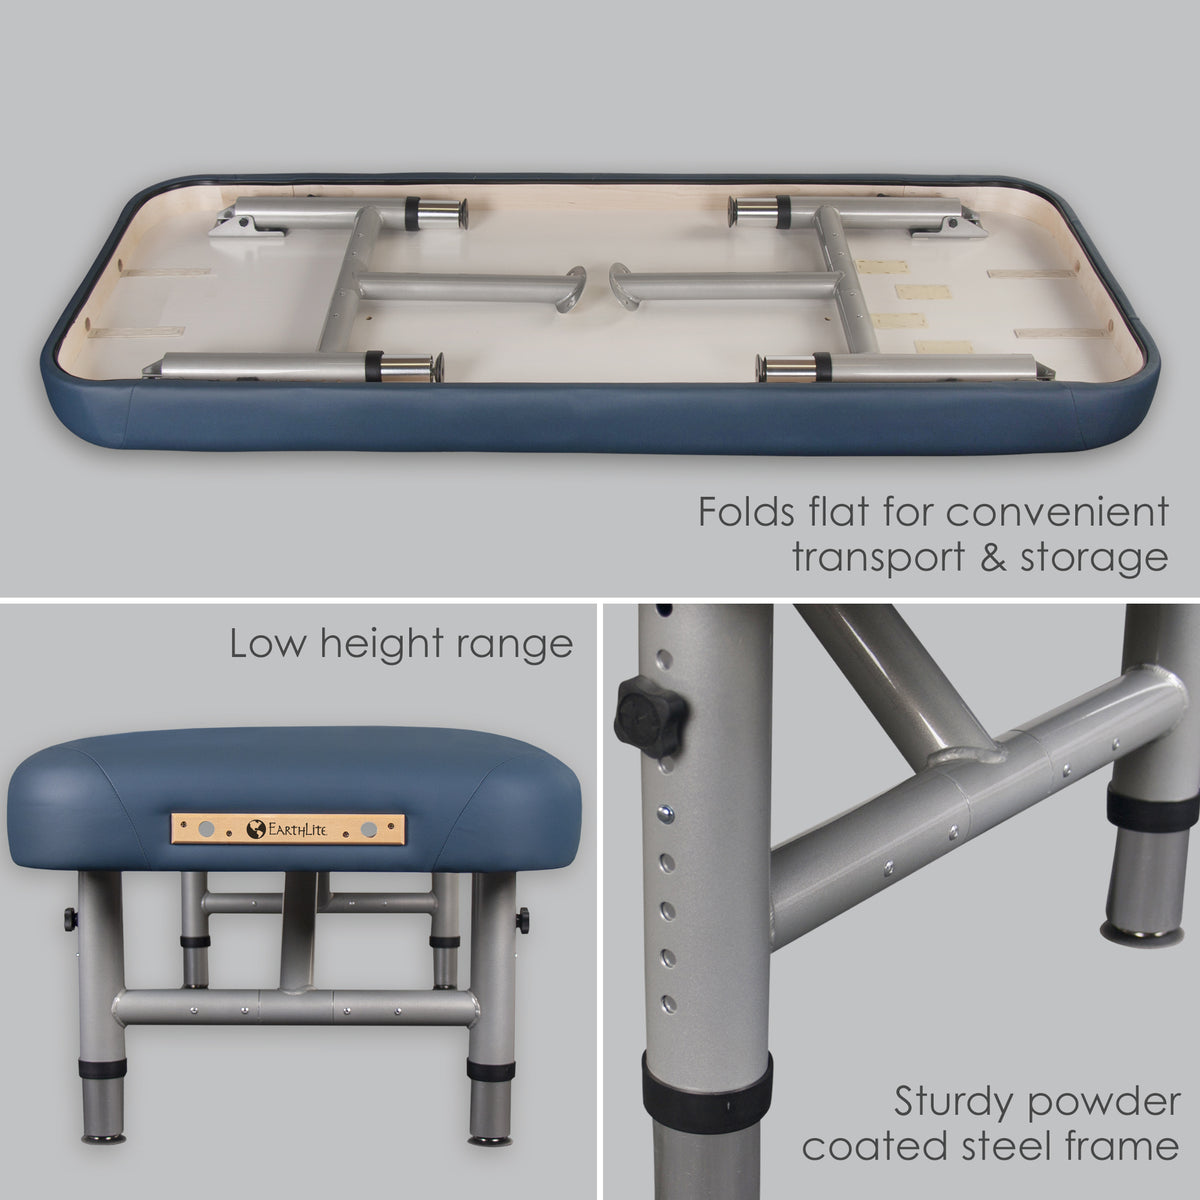 Earthlite - Yosemite 30 Chiropractic Massage Table - Superb Massage Tables